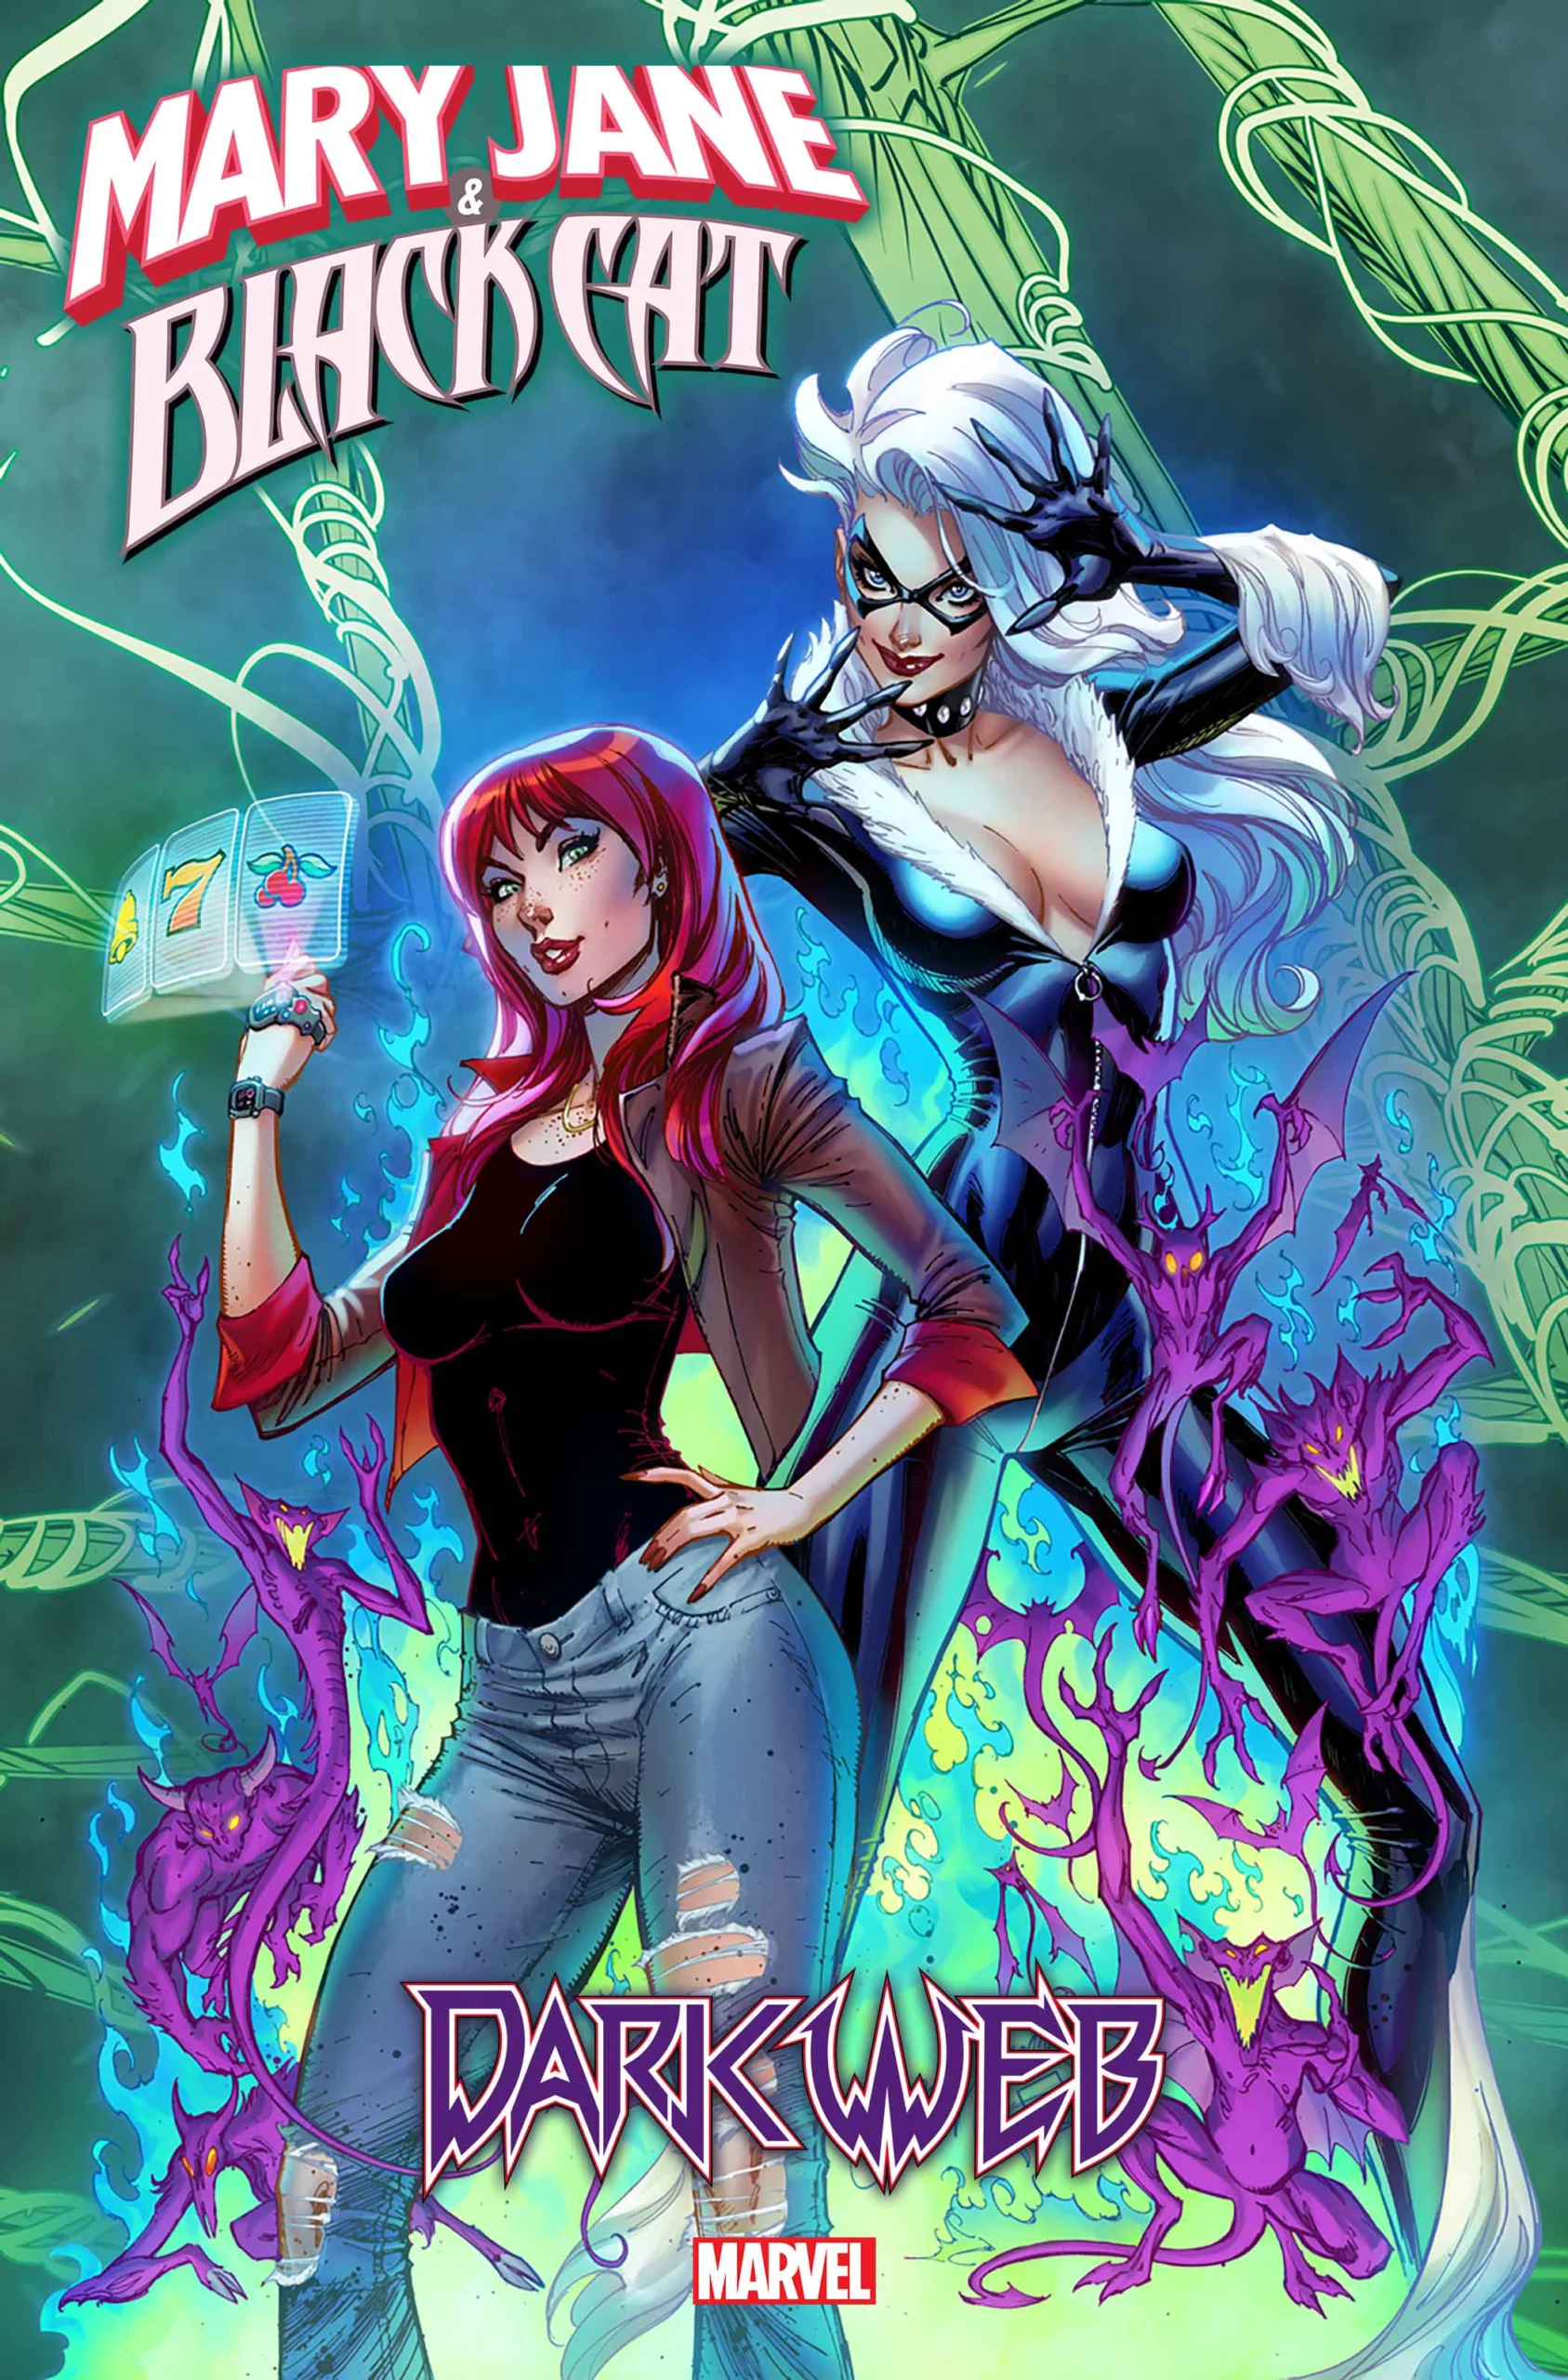 Mary Jane and Black Cat cover with a green backdrop. The women standing in strong striking poses, MJ to the left, Cat to the right.